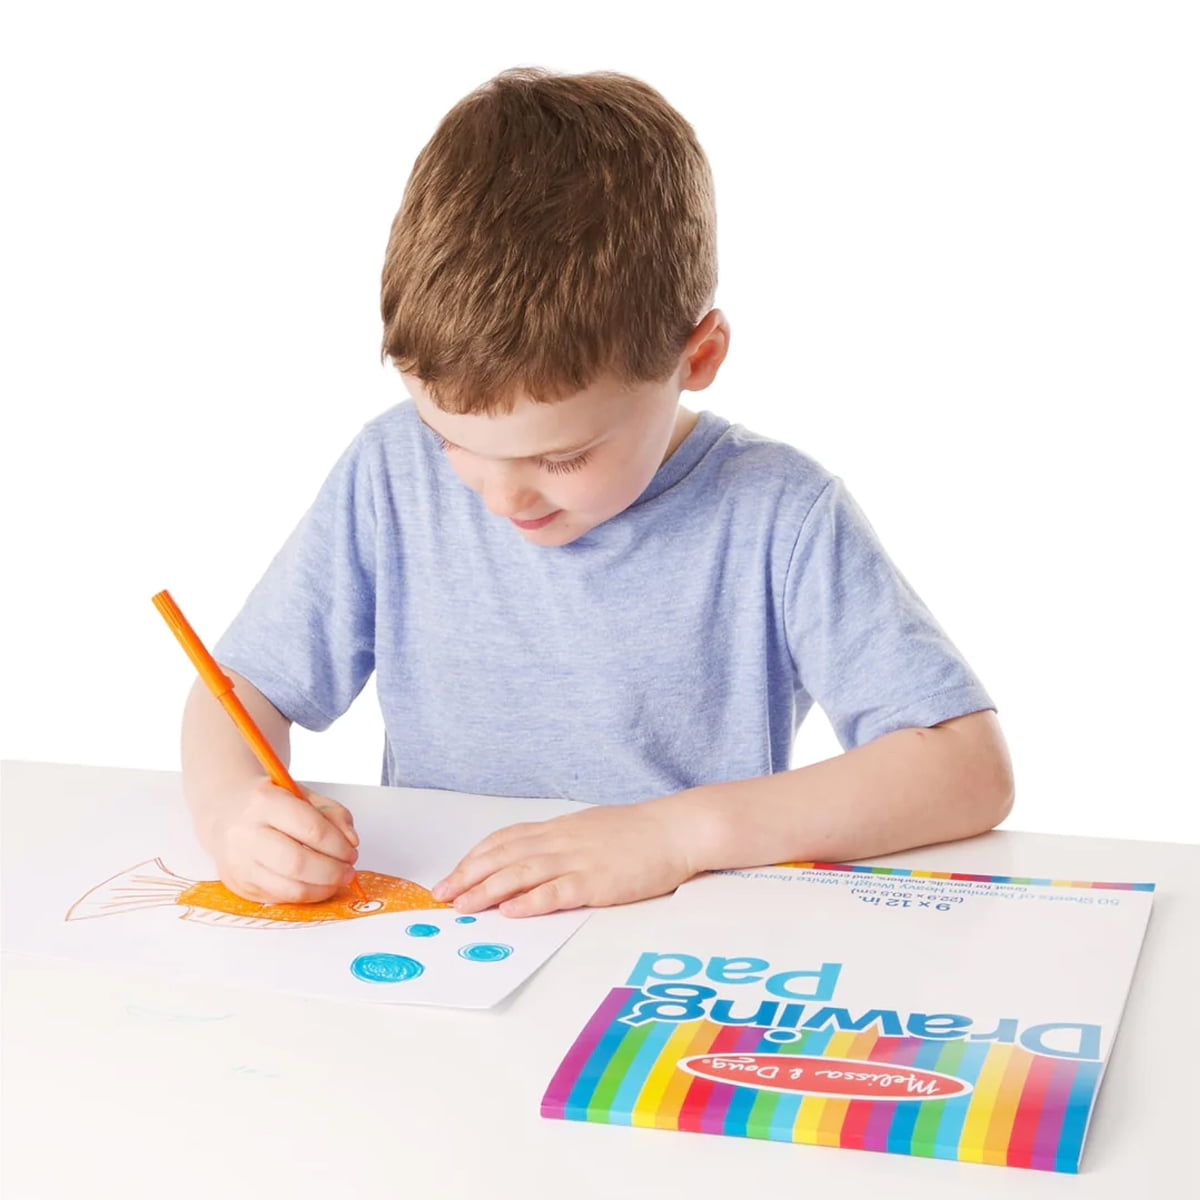 Melissa & Doug Sketch Pad 9 x 12 Inches - 50 Sheets, 2-Pack